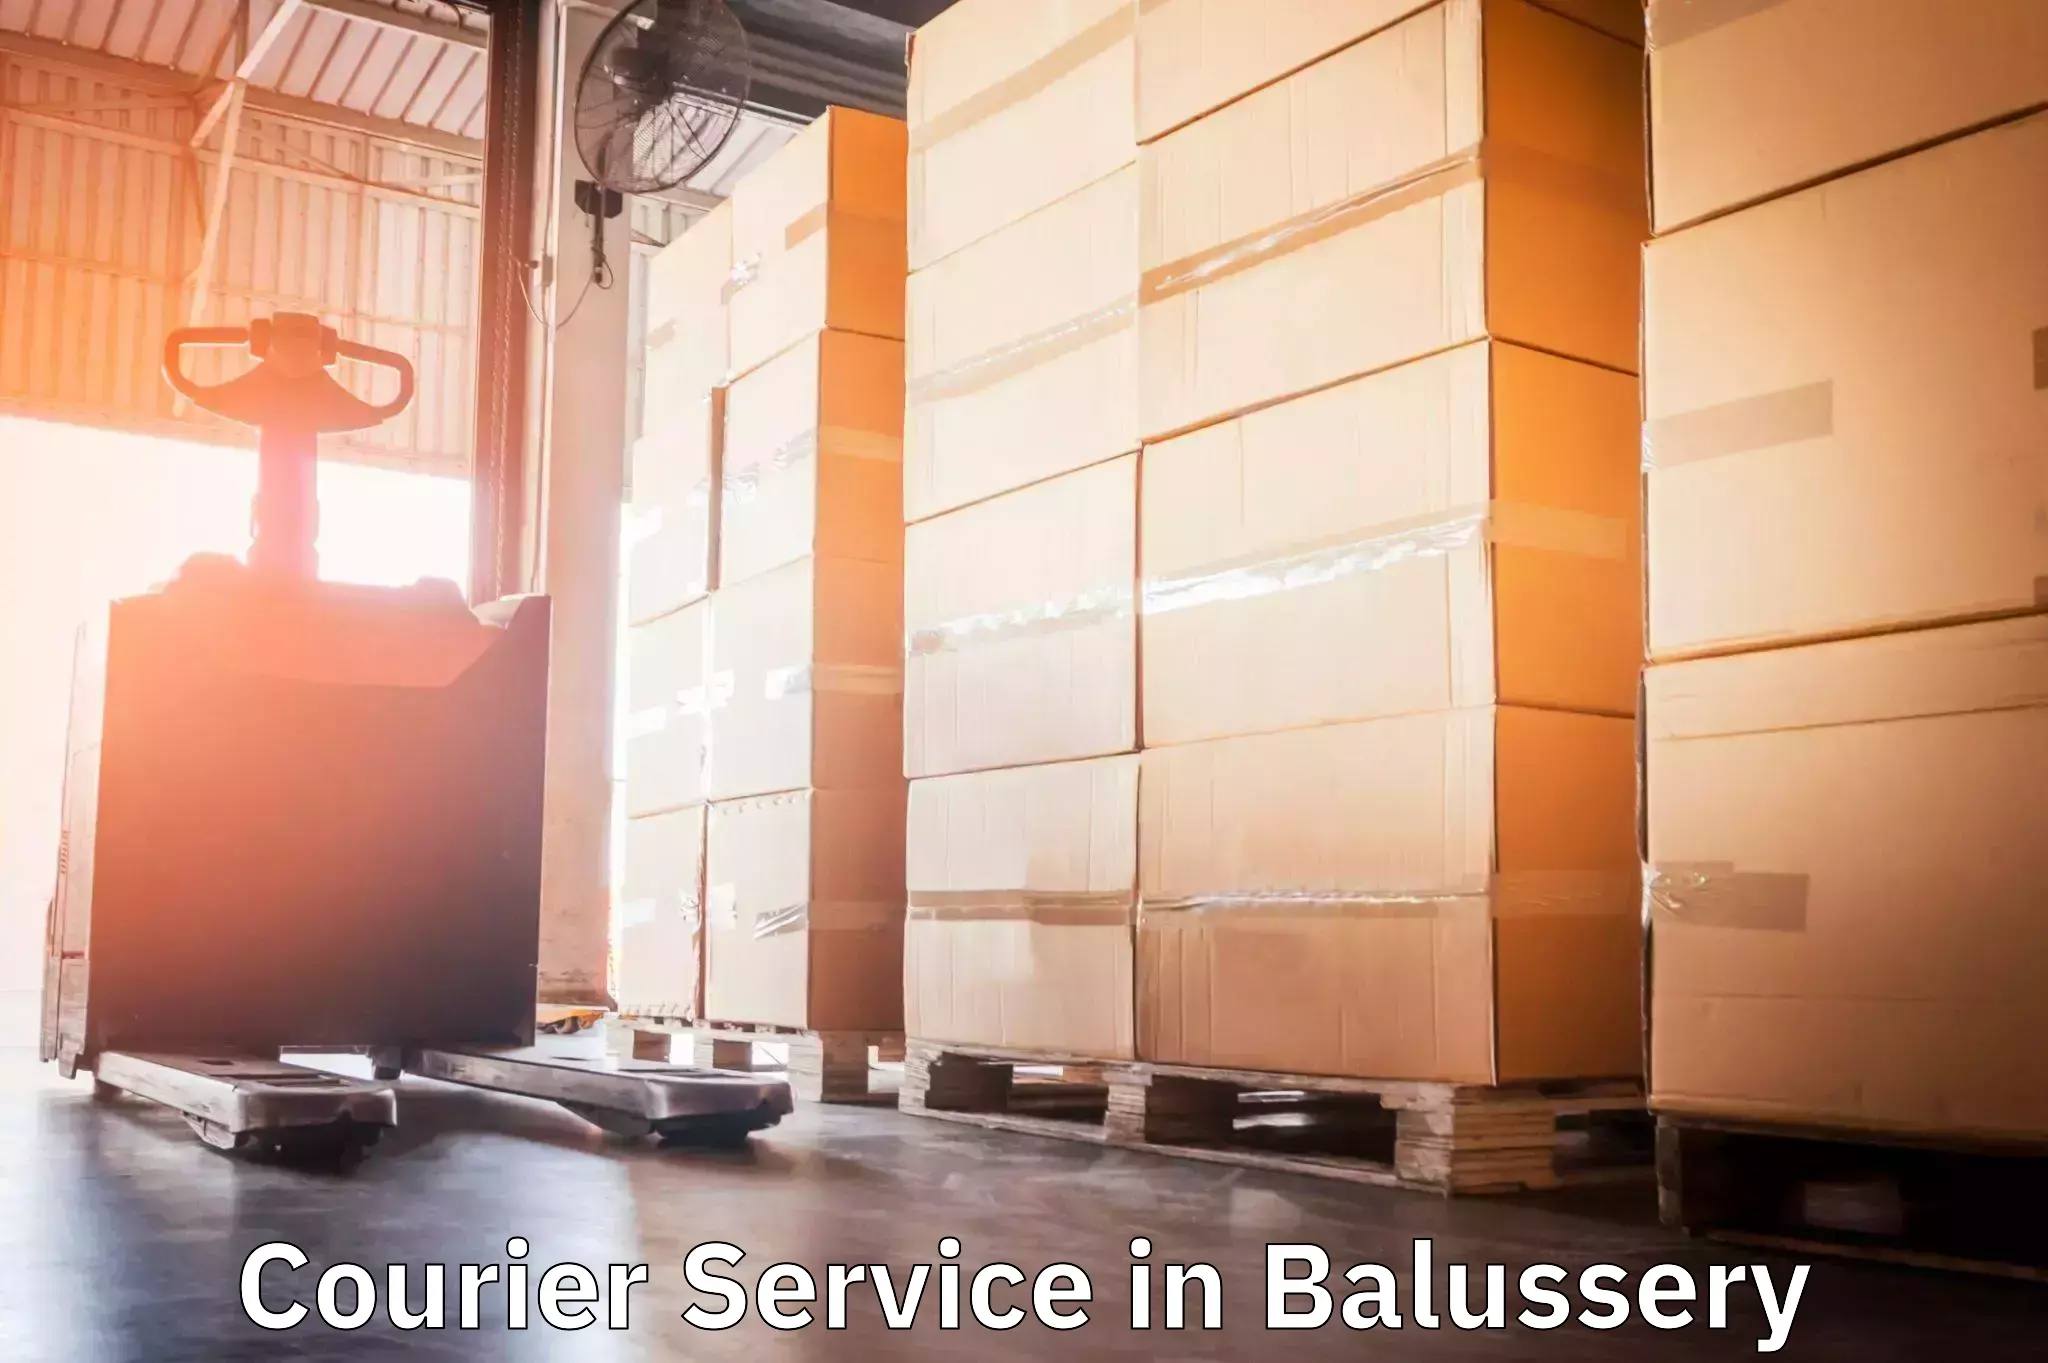 Customer-oriented courier services in Balussery